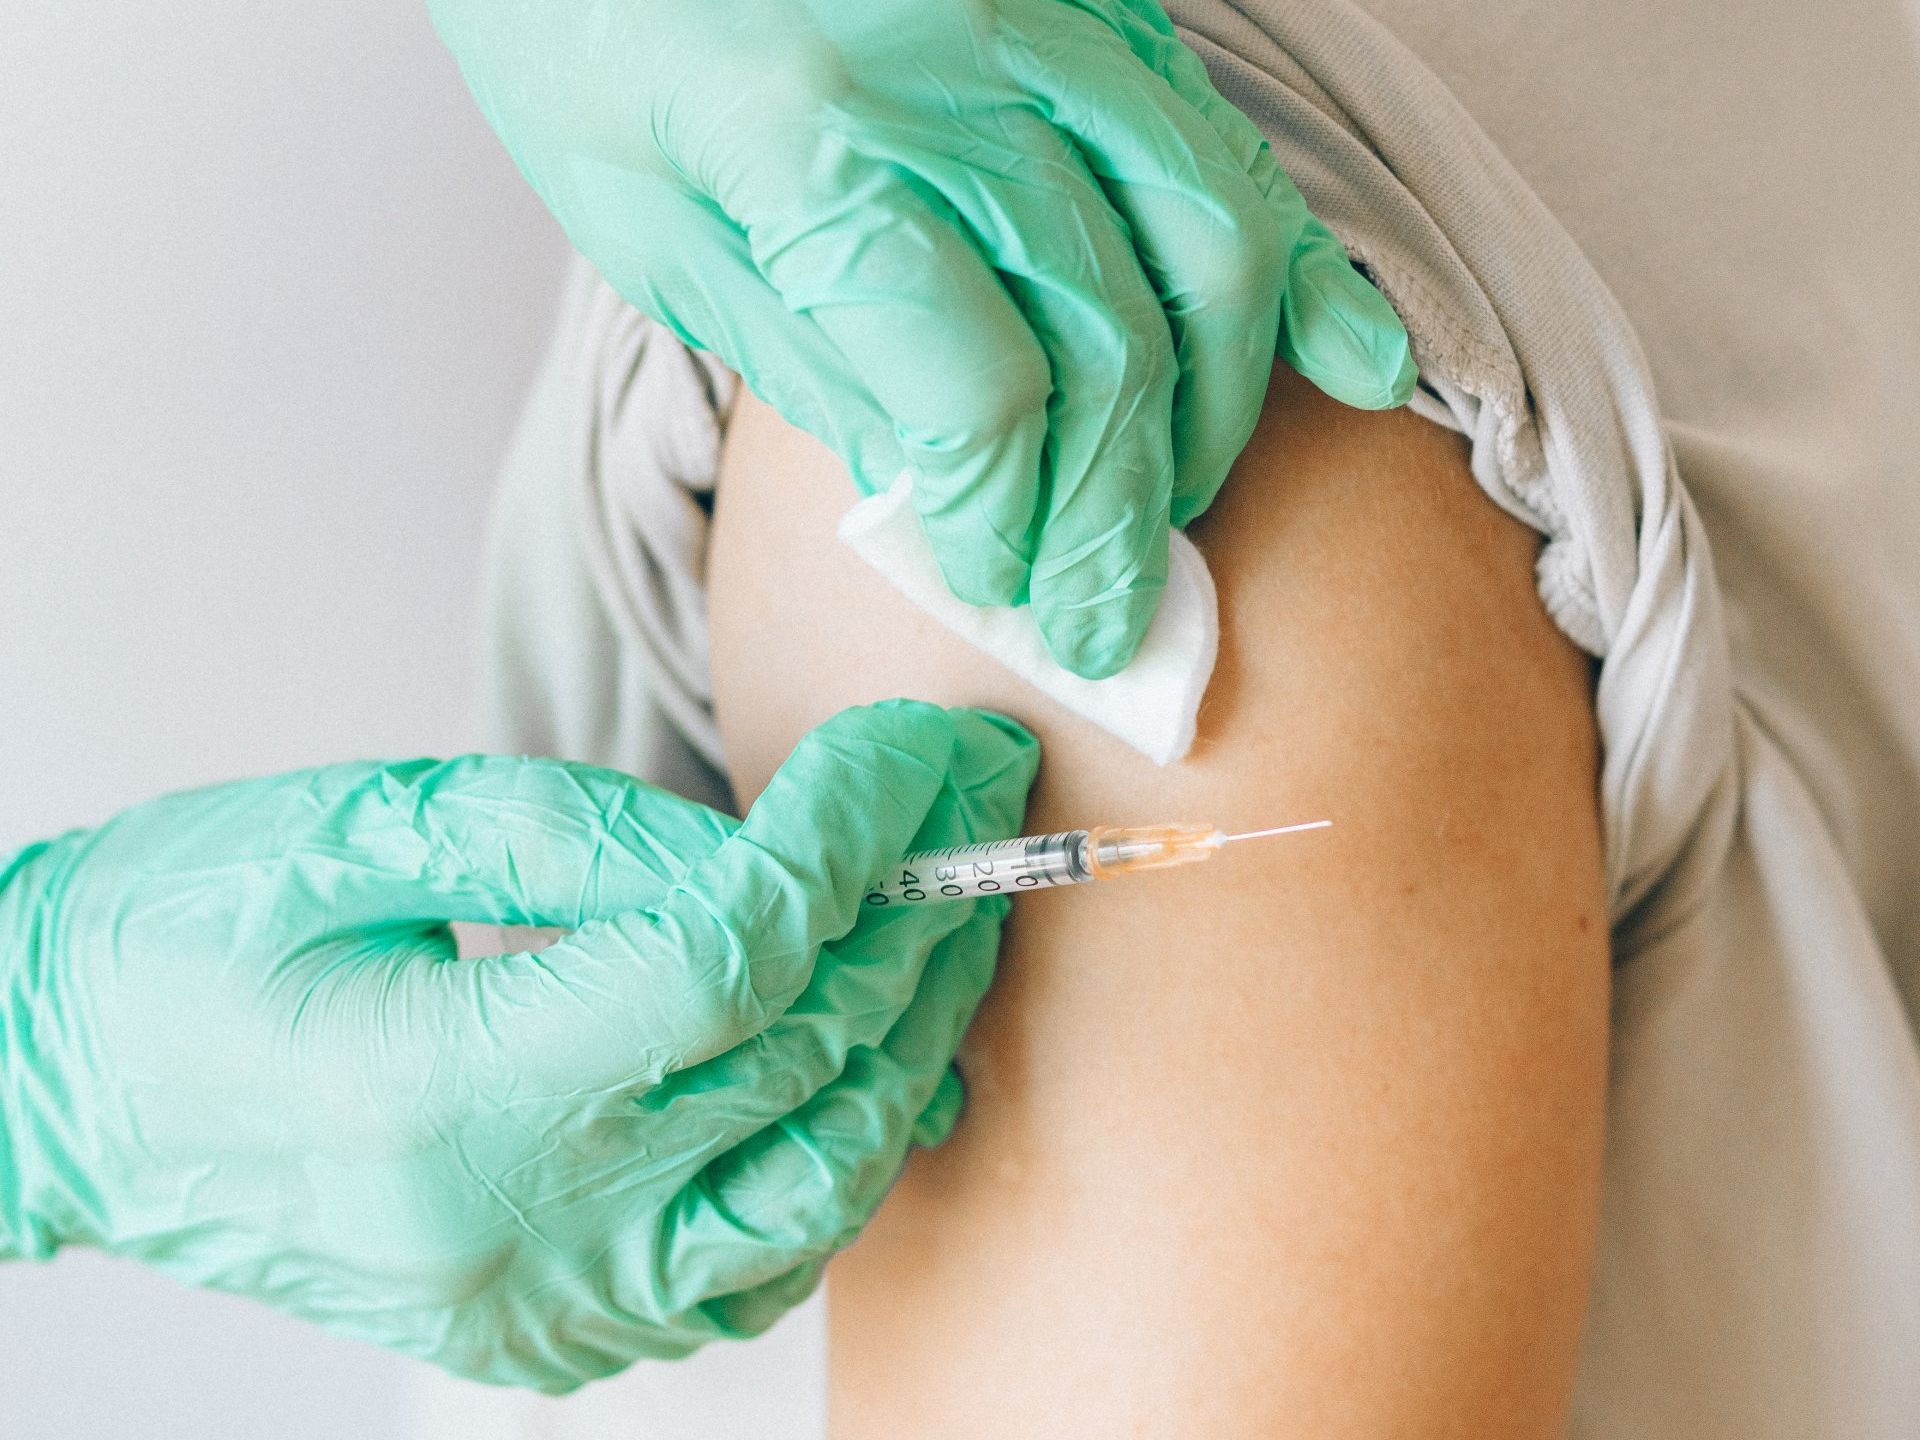 A person is getting a vaccine in their arm.